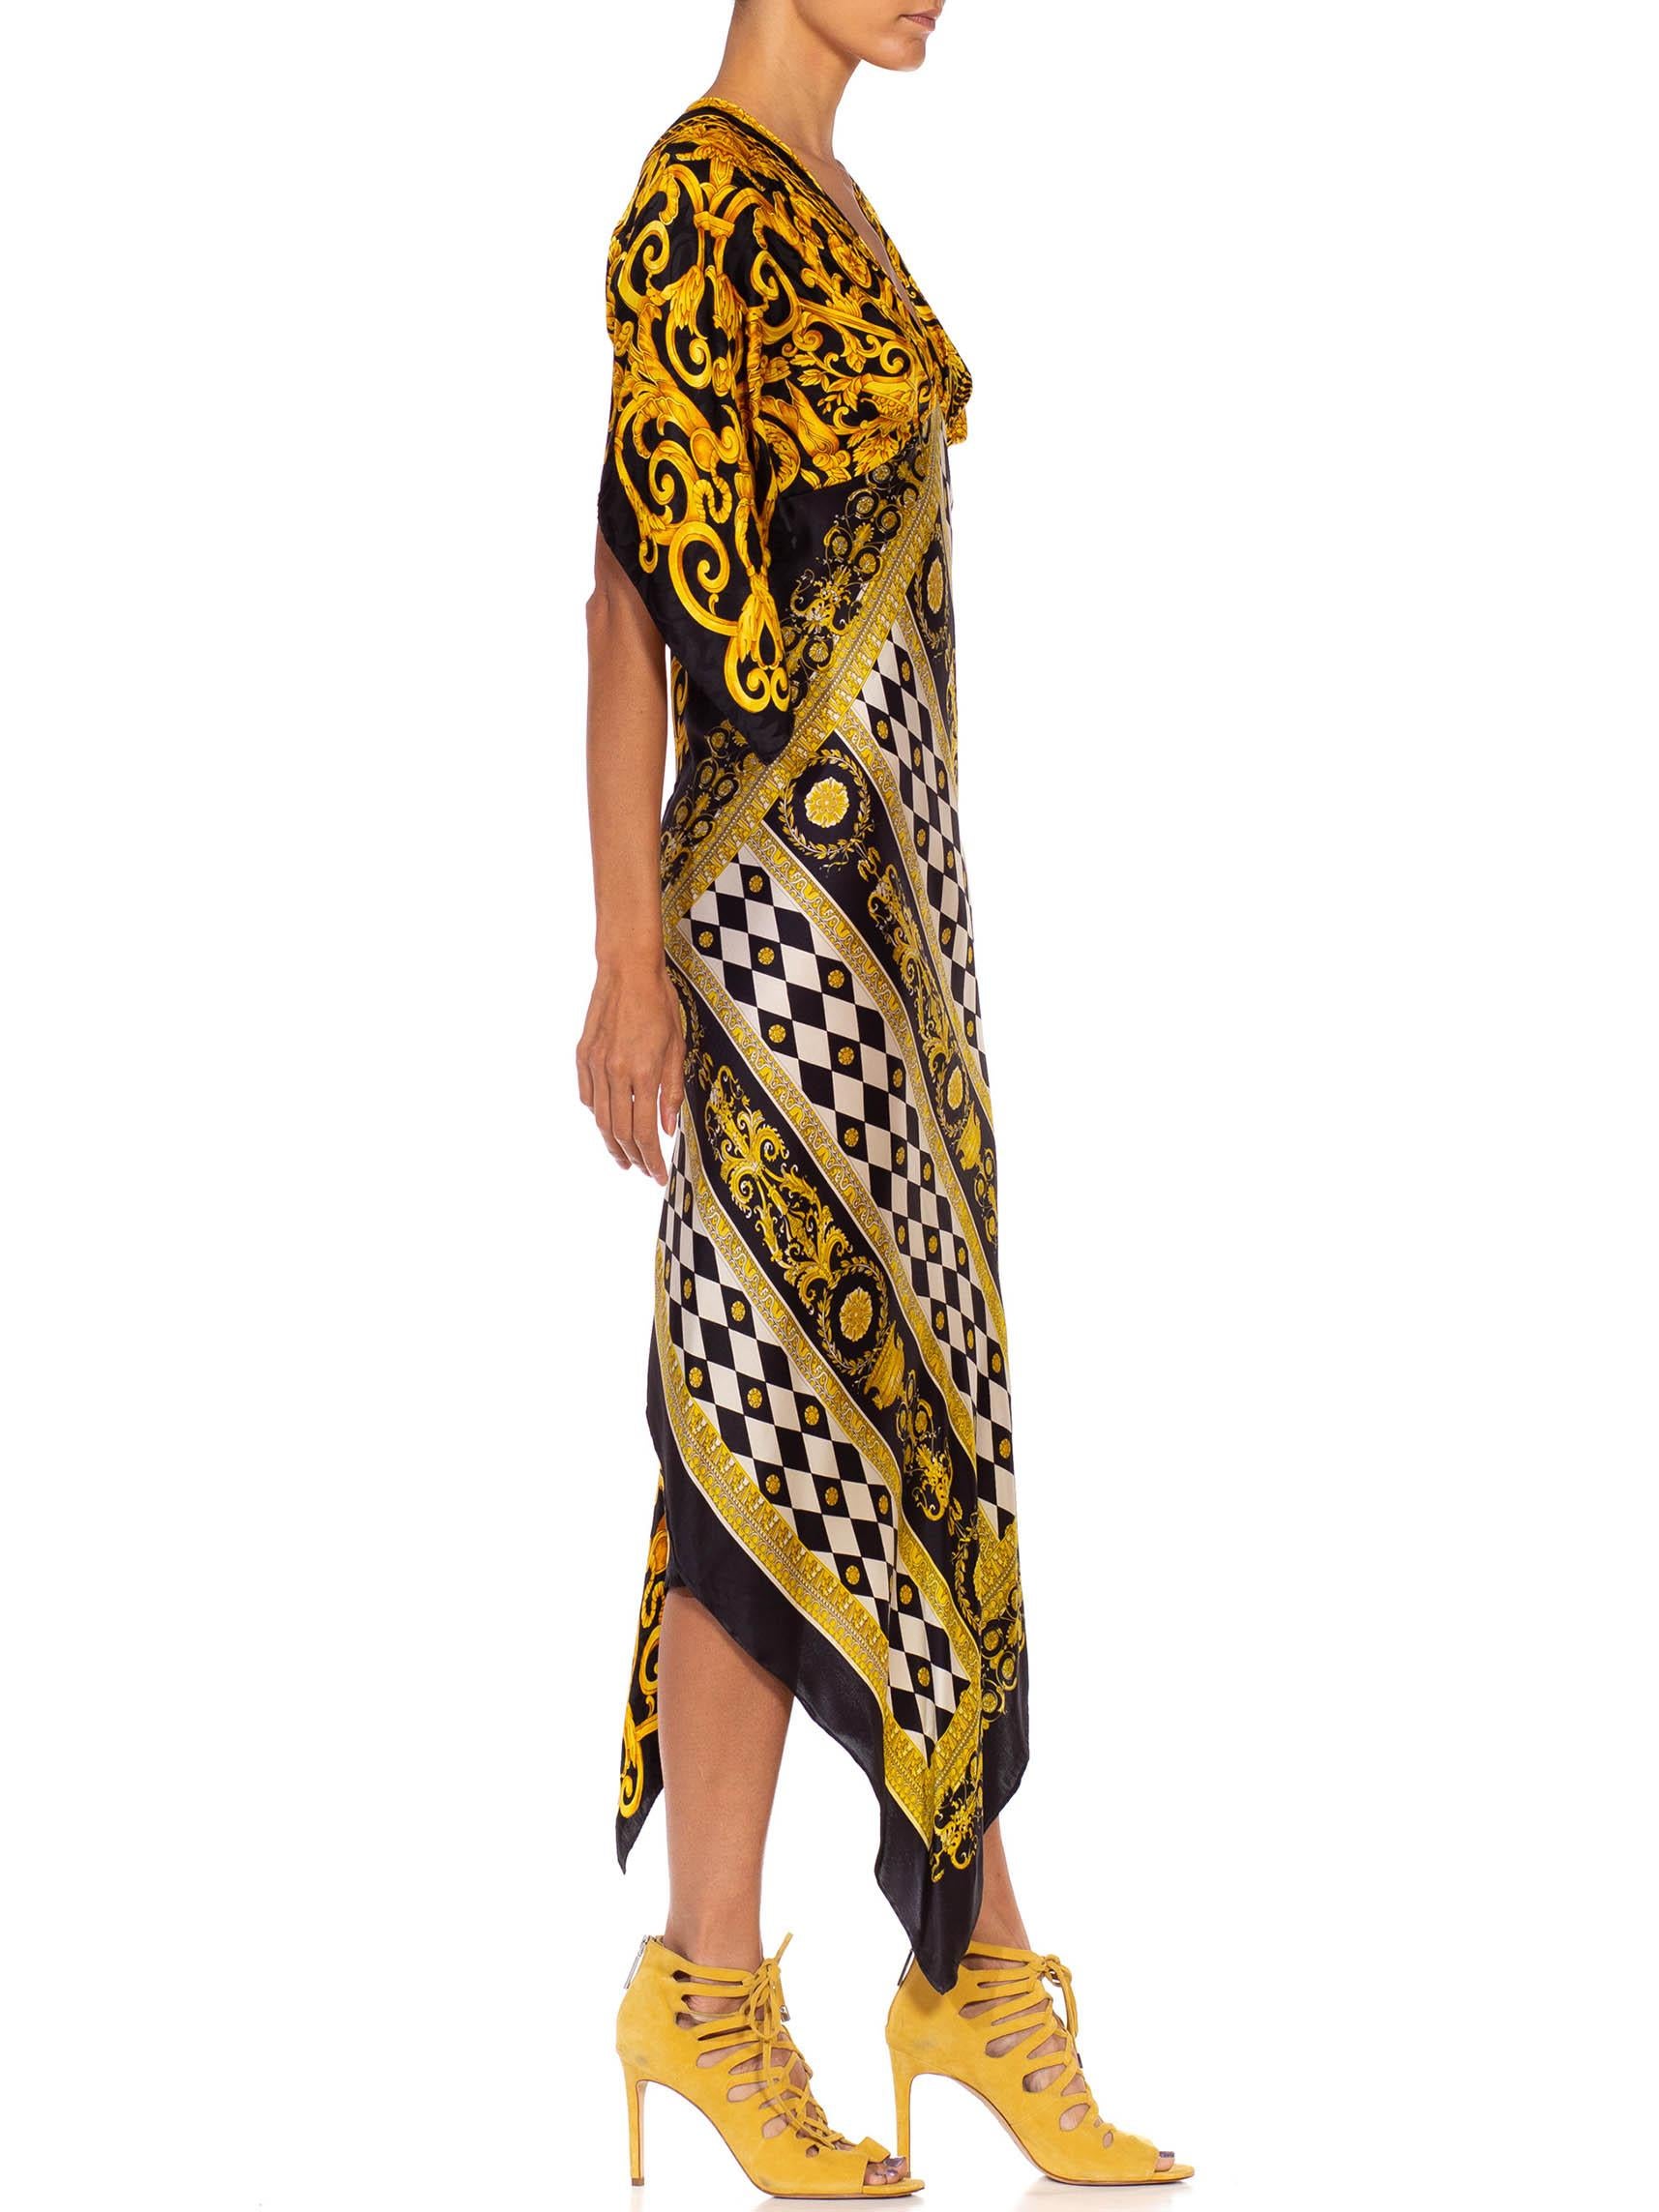 MORPHEW COLLECTION Black & Gold Status Print Silk Geometric Two Scarf Dress
MORPHEW COLLECTION is made entirely by hand in our NYC Ateliér of rare antique materials sourced from around the globe. Our sustainable vintage materials represent over a